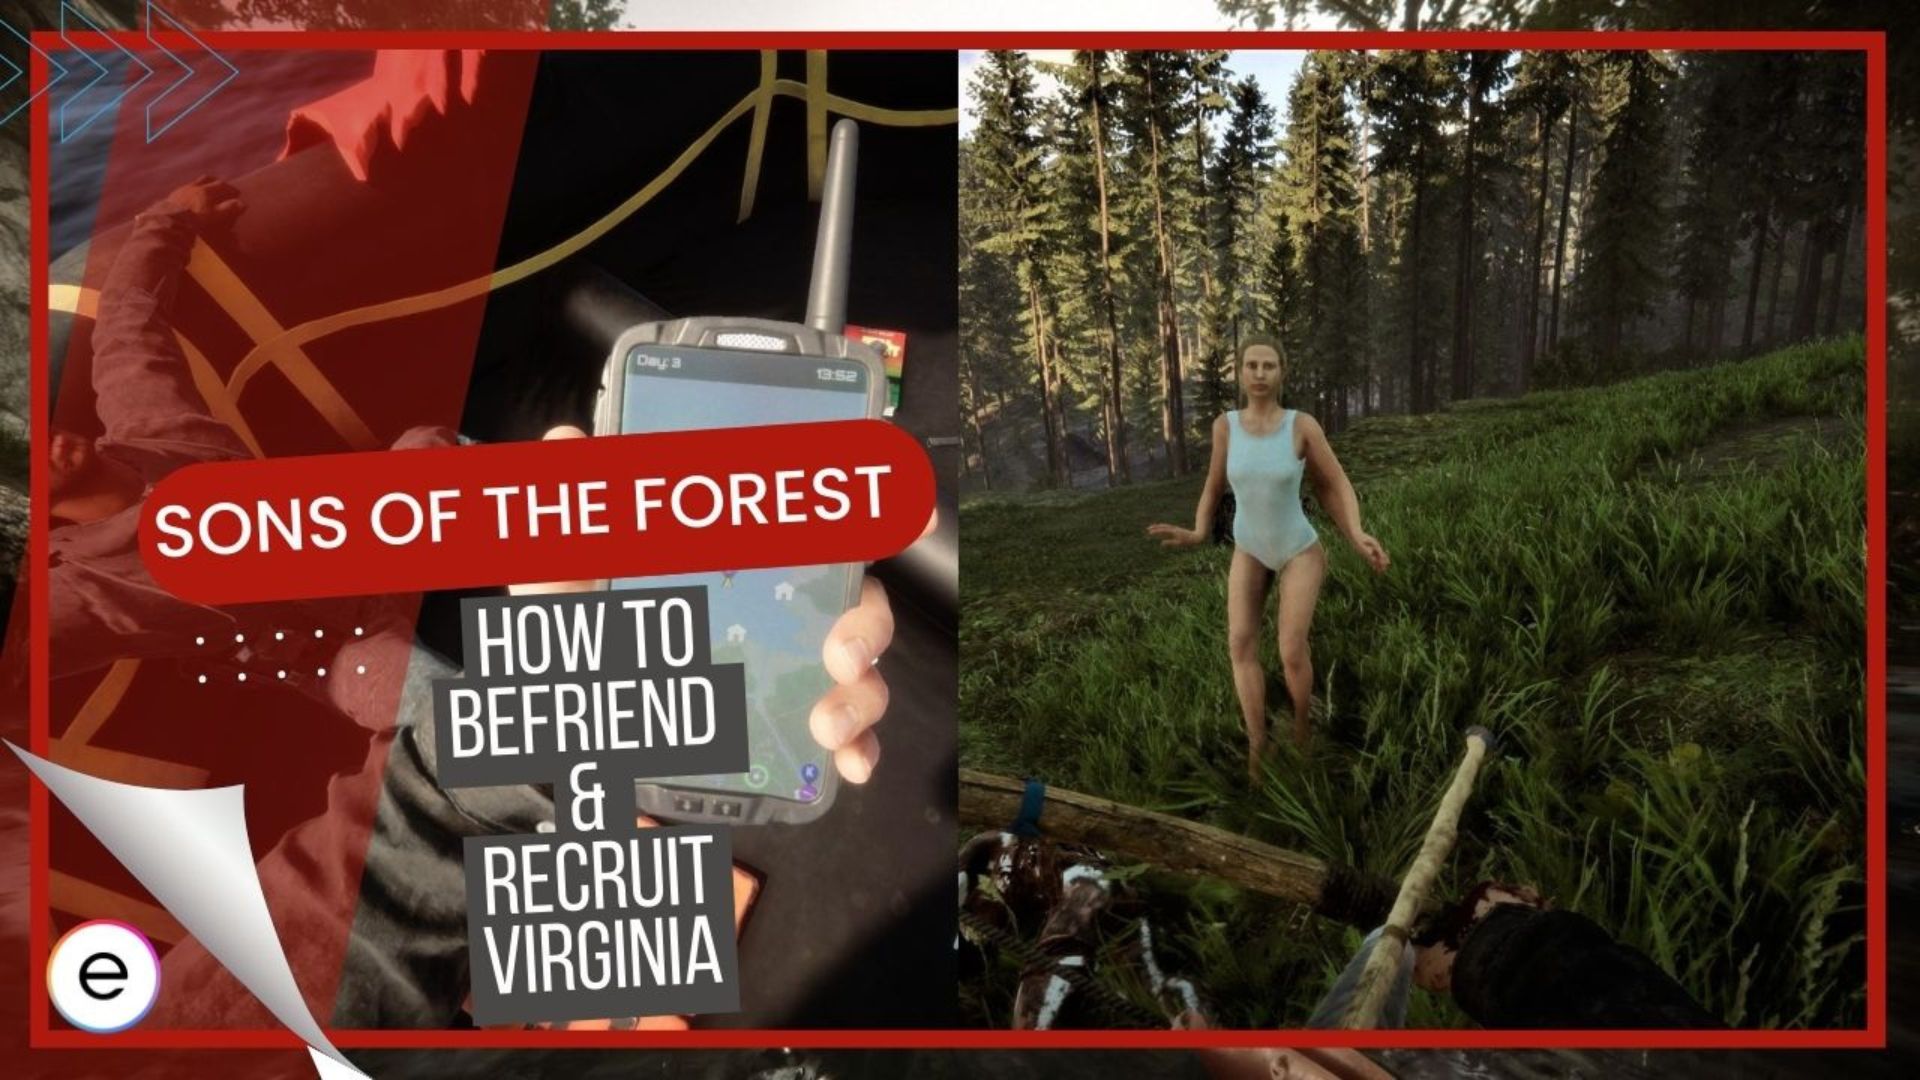 virginia girl guide in sons of the forest